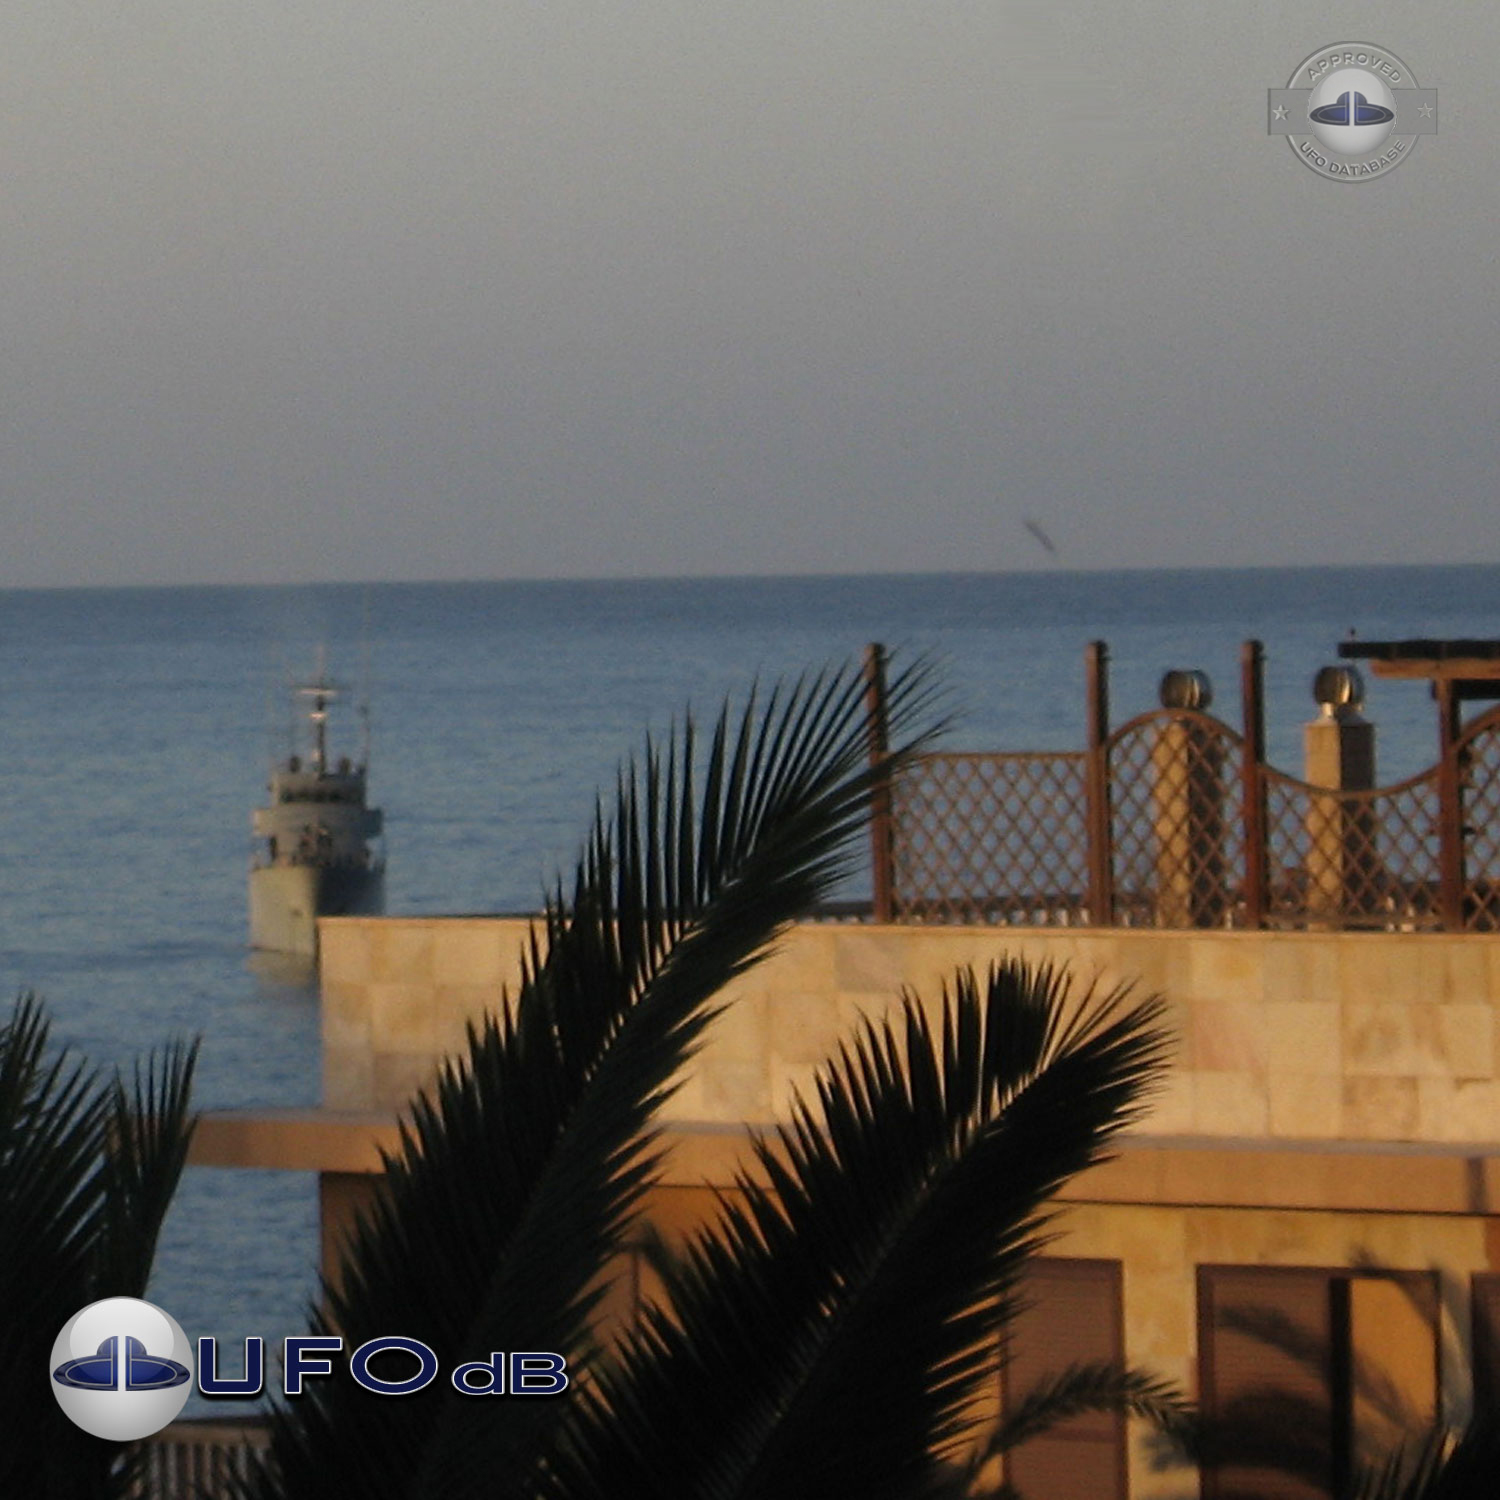 Proof of UFO diving under the Sea Canary island Fuerteventura | 2011 UFO Picture #235-1